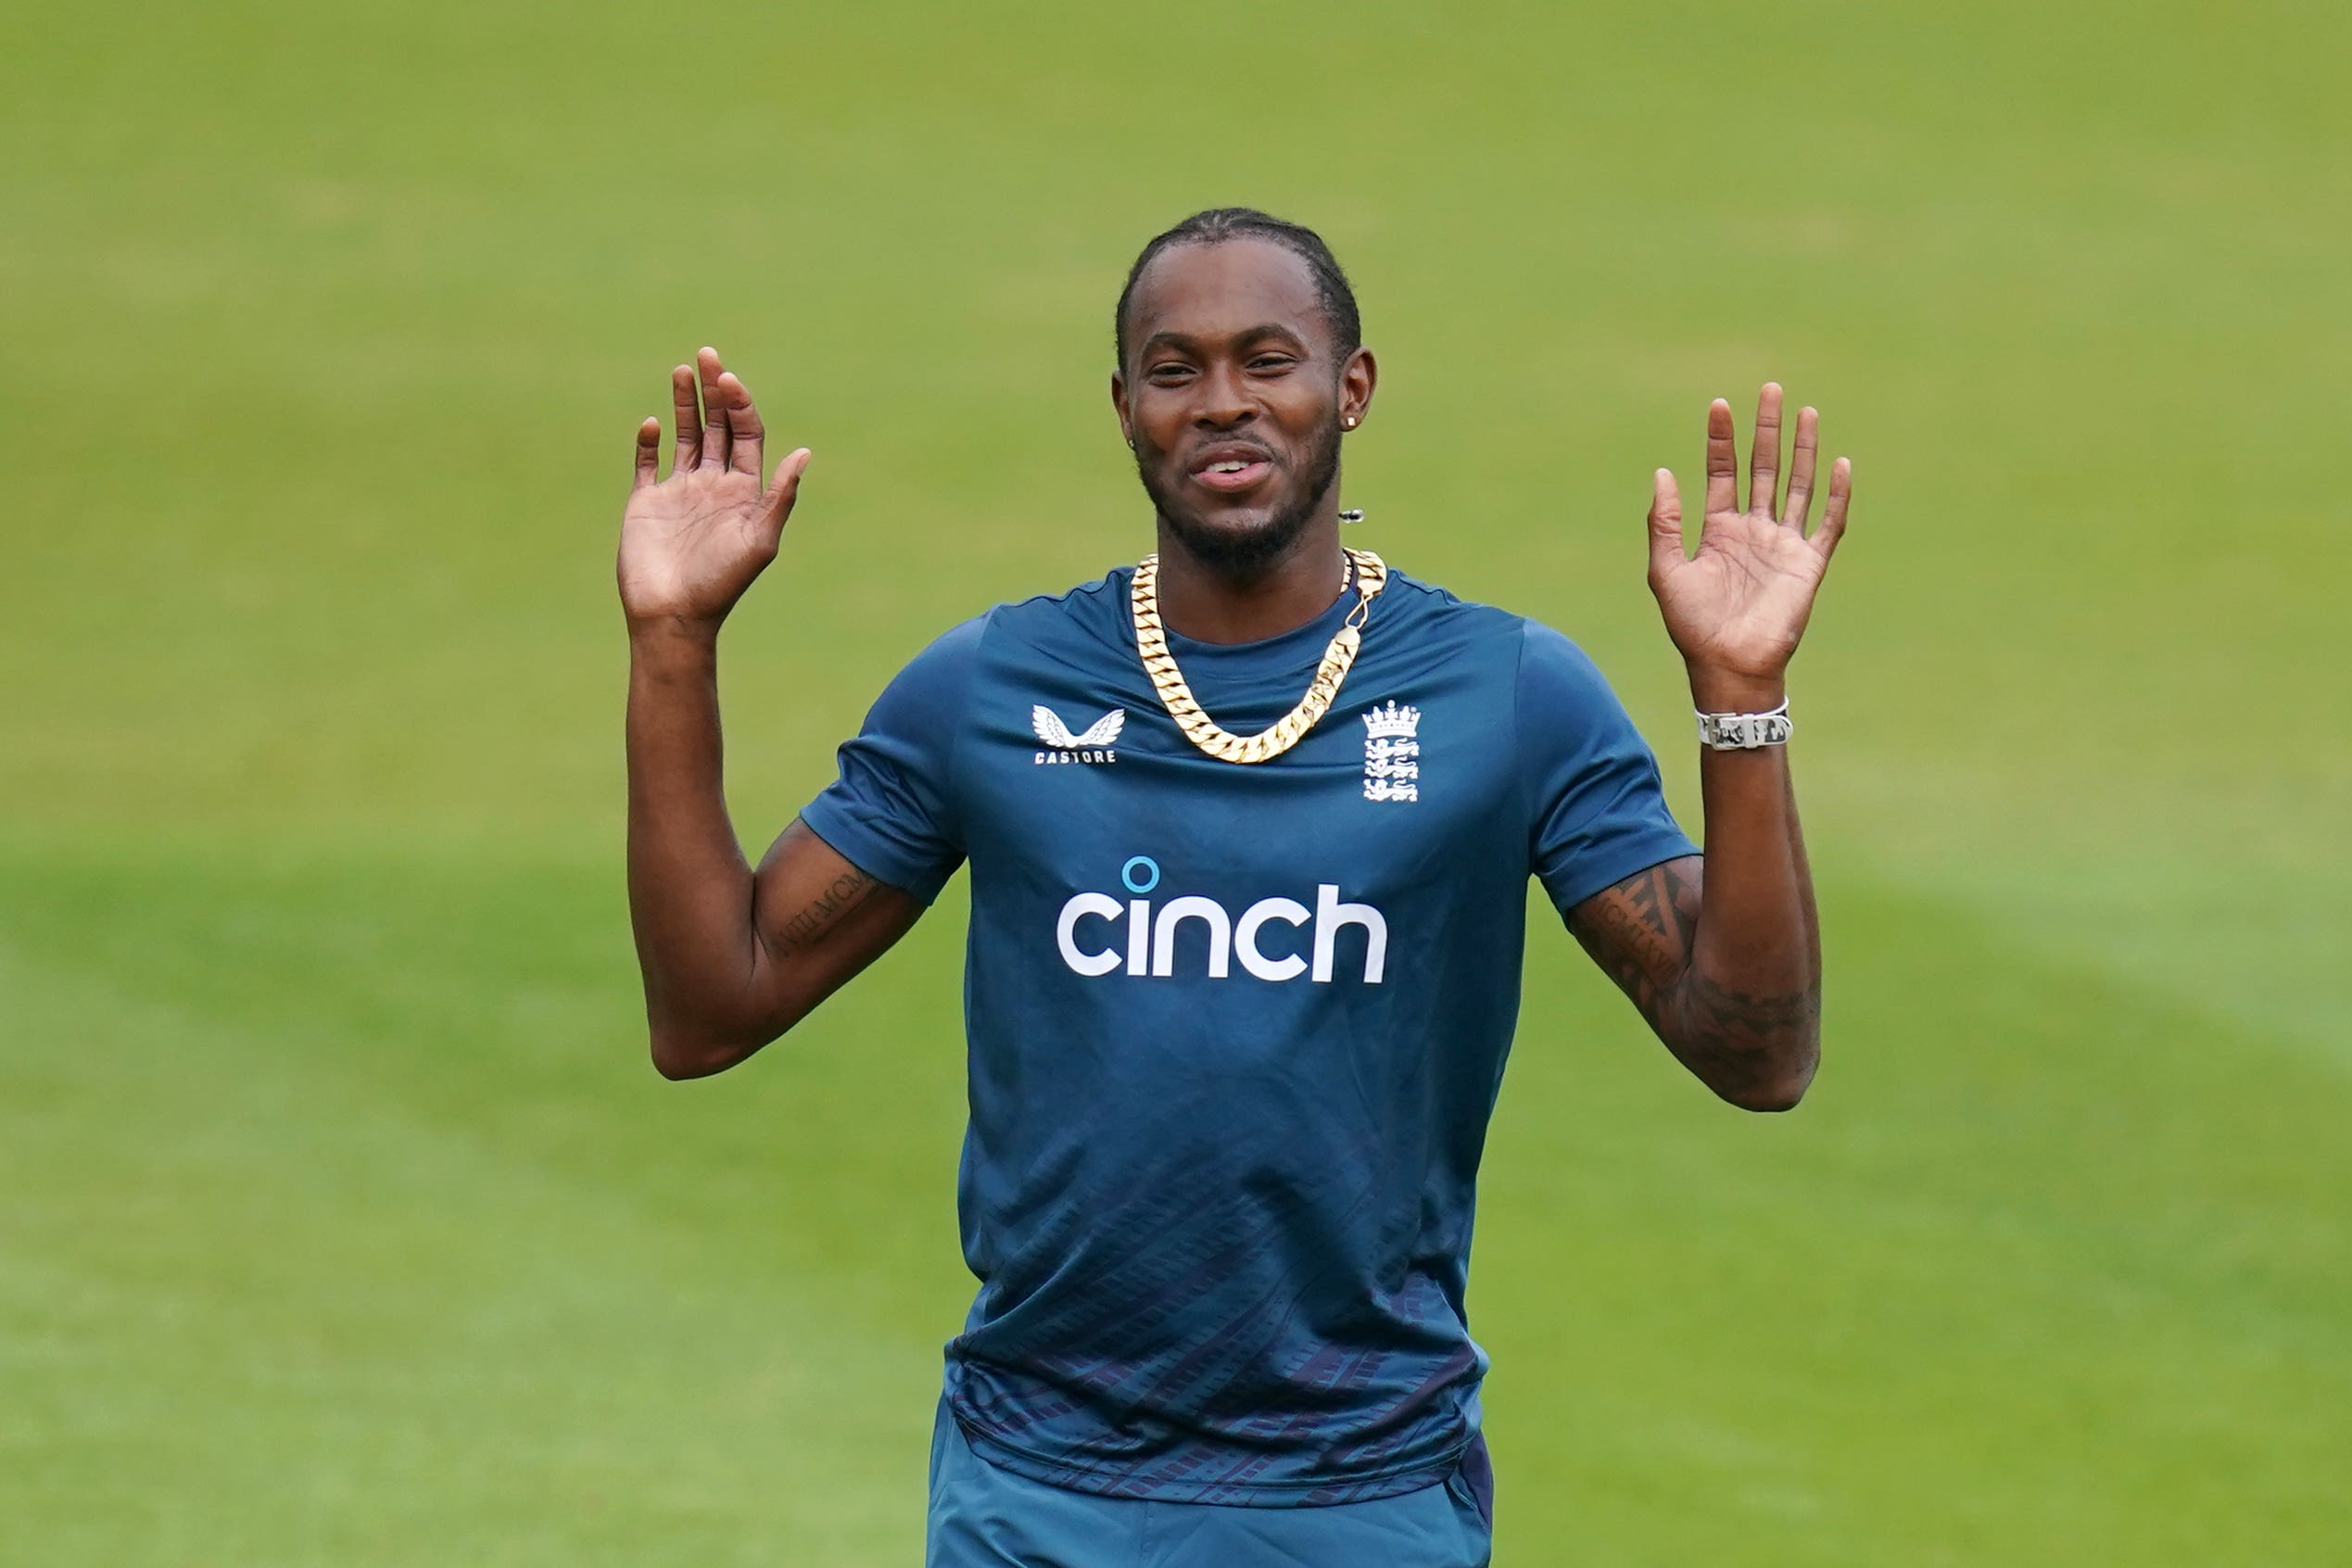 Jofra Archer was involved during England’s net session at the Kia Oval (John Walton/PA)